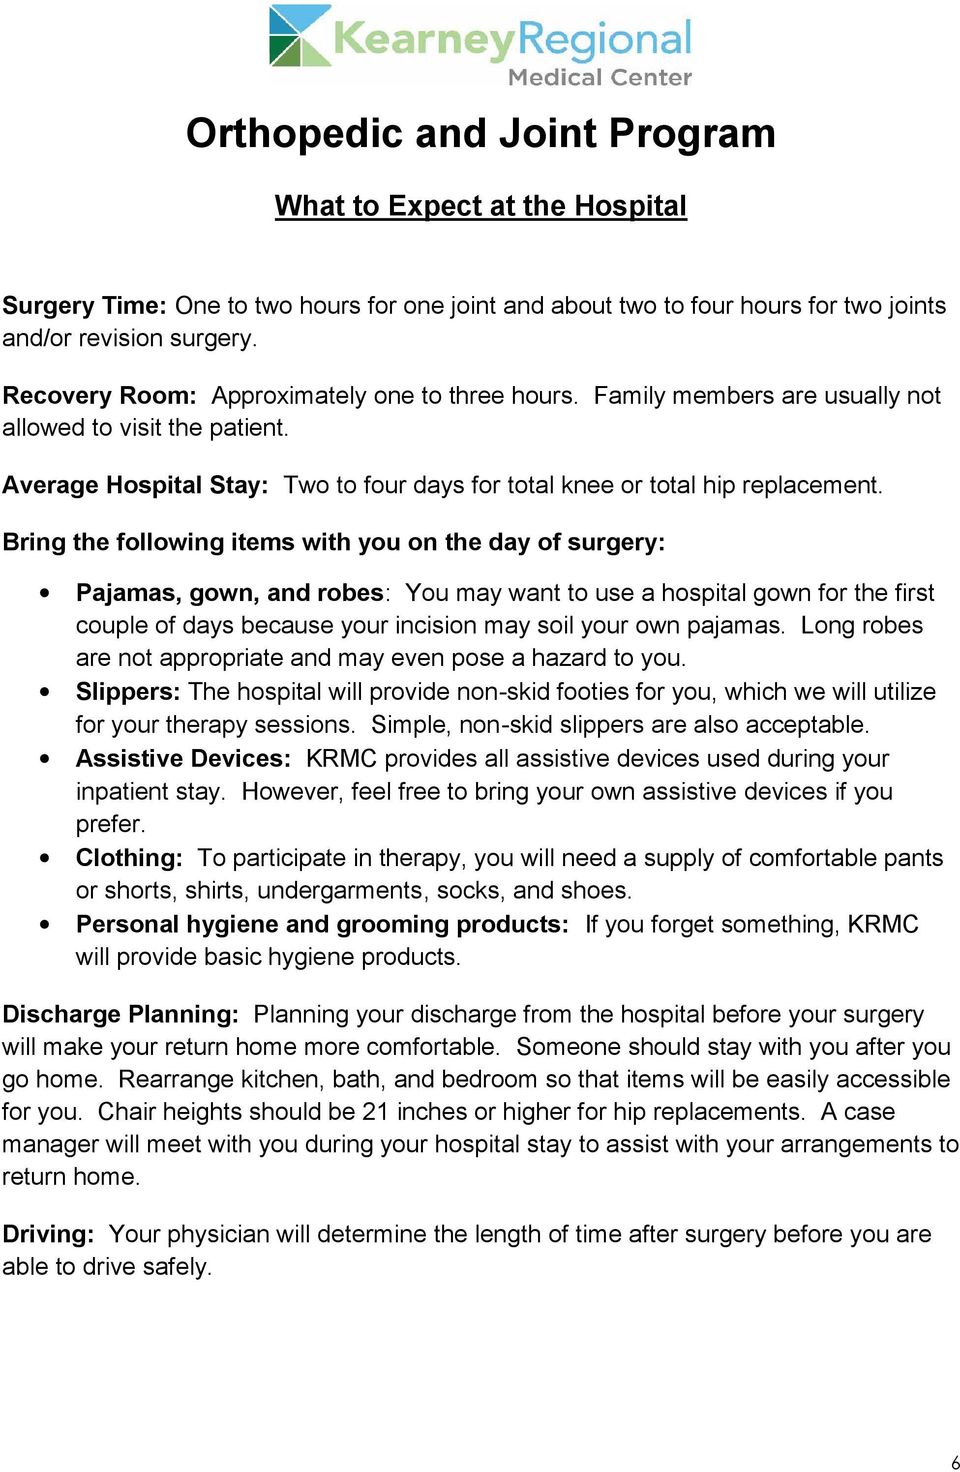 Bring the following items with you on the day of surgery: Pajamas, gown, and robes: You may want to use a hospital gown for the first couple of days because your incision may soil your own pajamas.